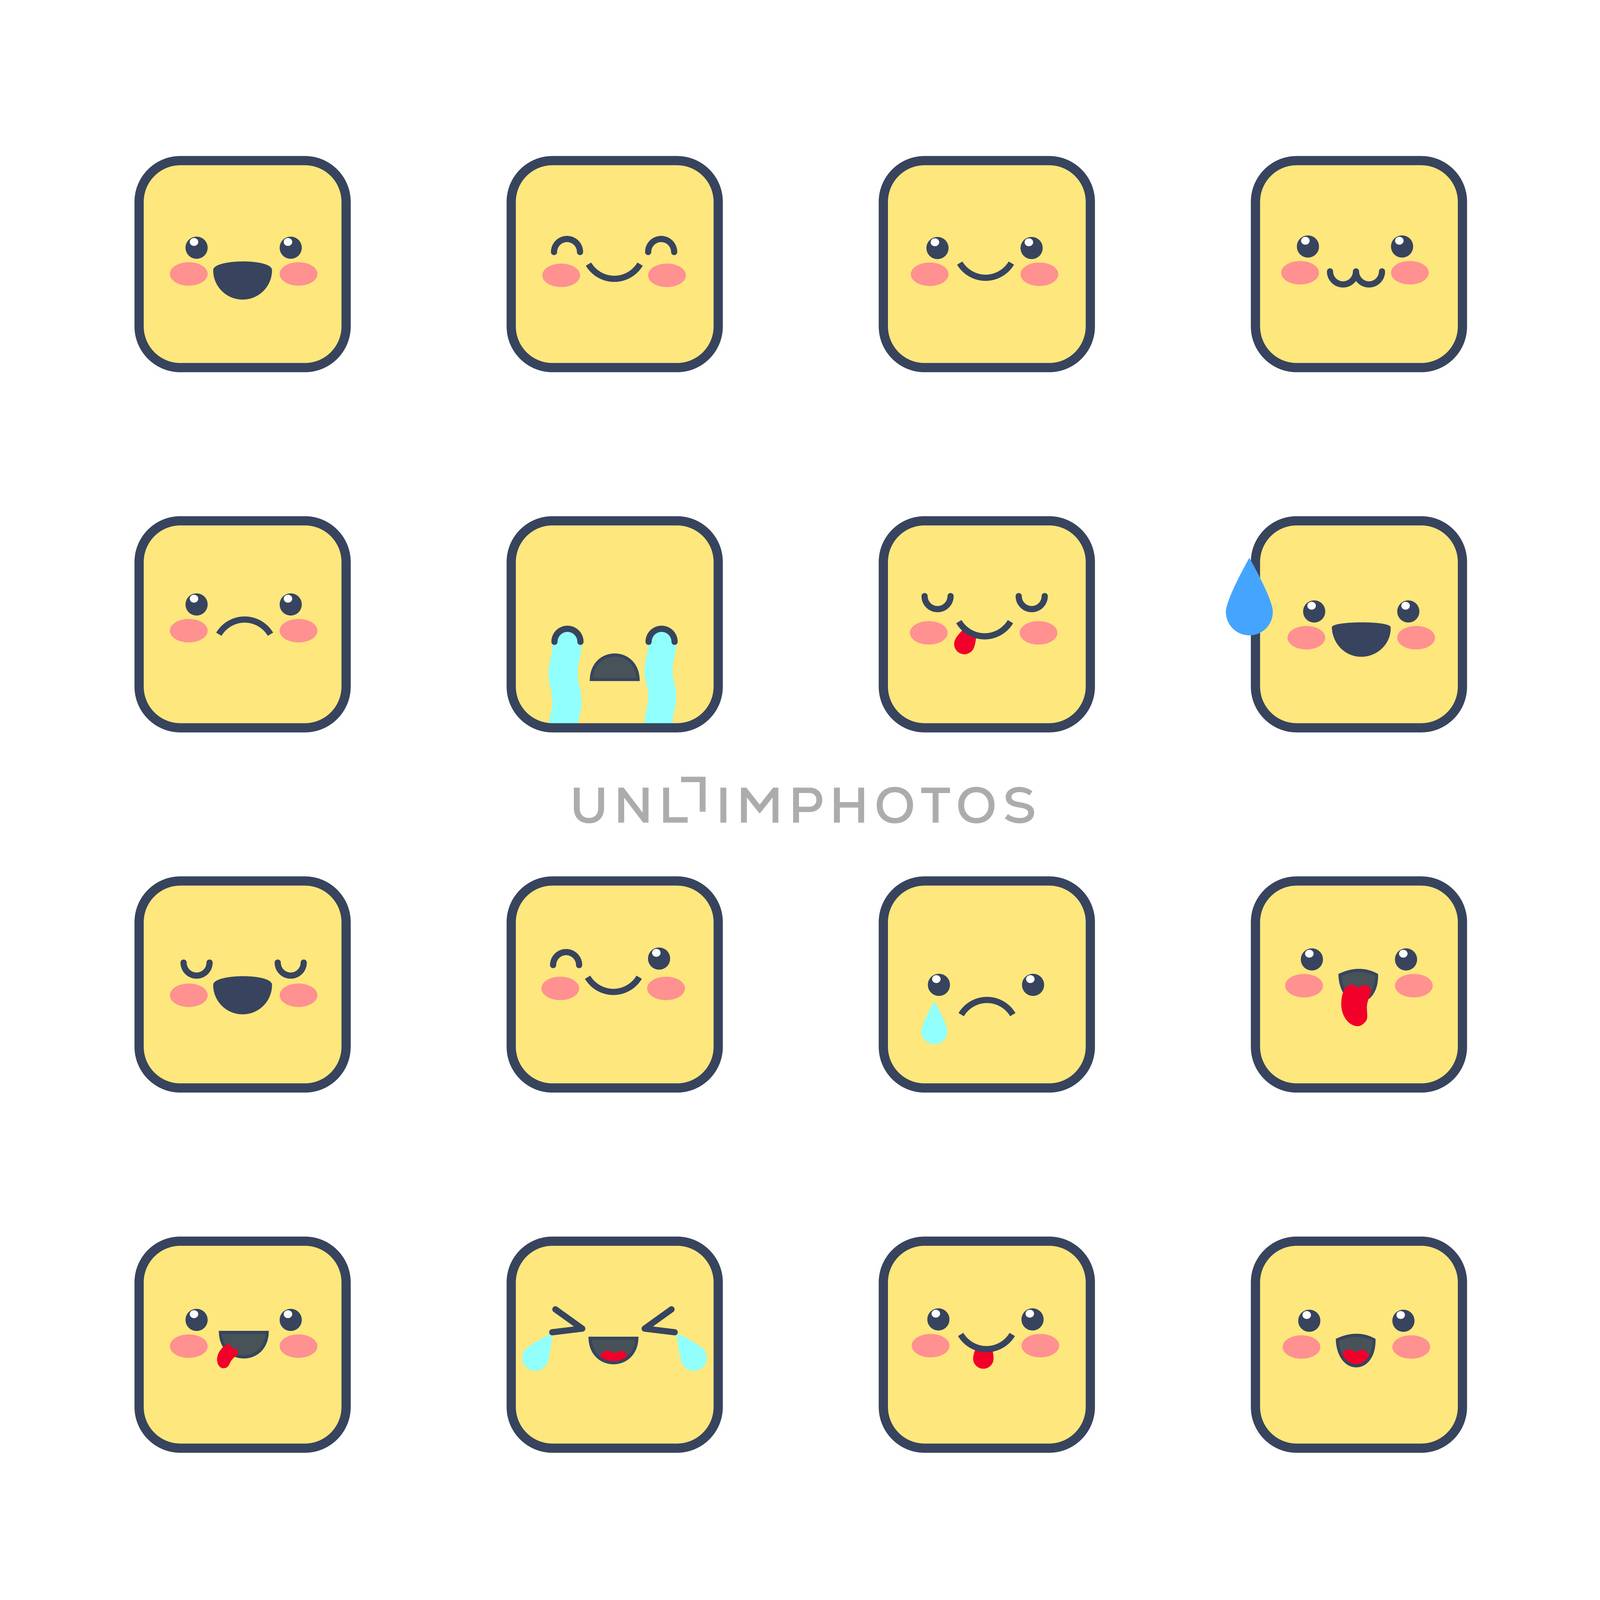 Set Emoji icons for applications and chat. Emoticons with different emotions isolated on white background. by Elena_Garder